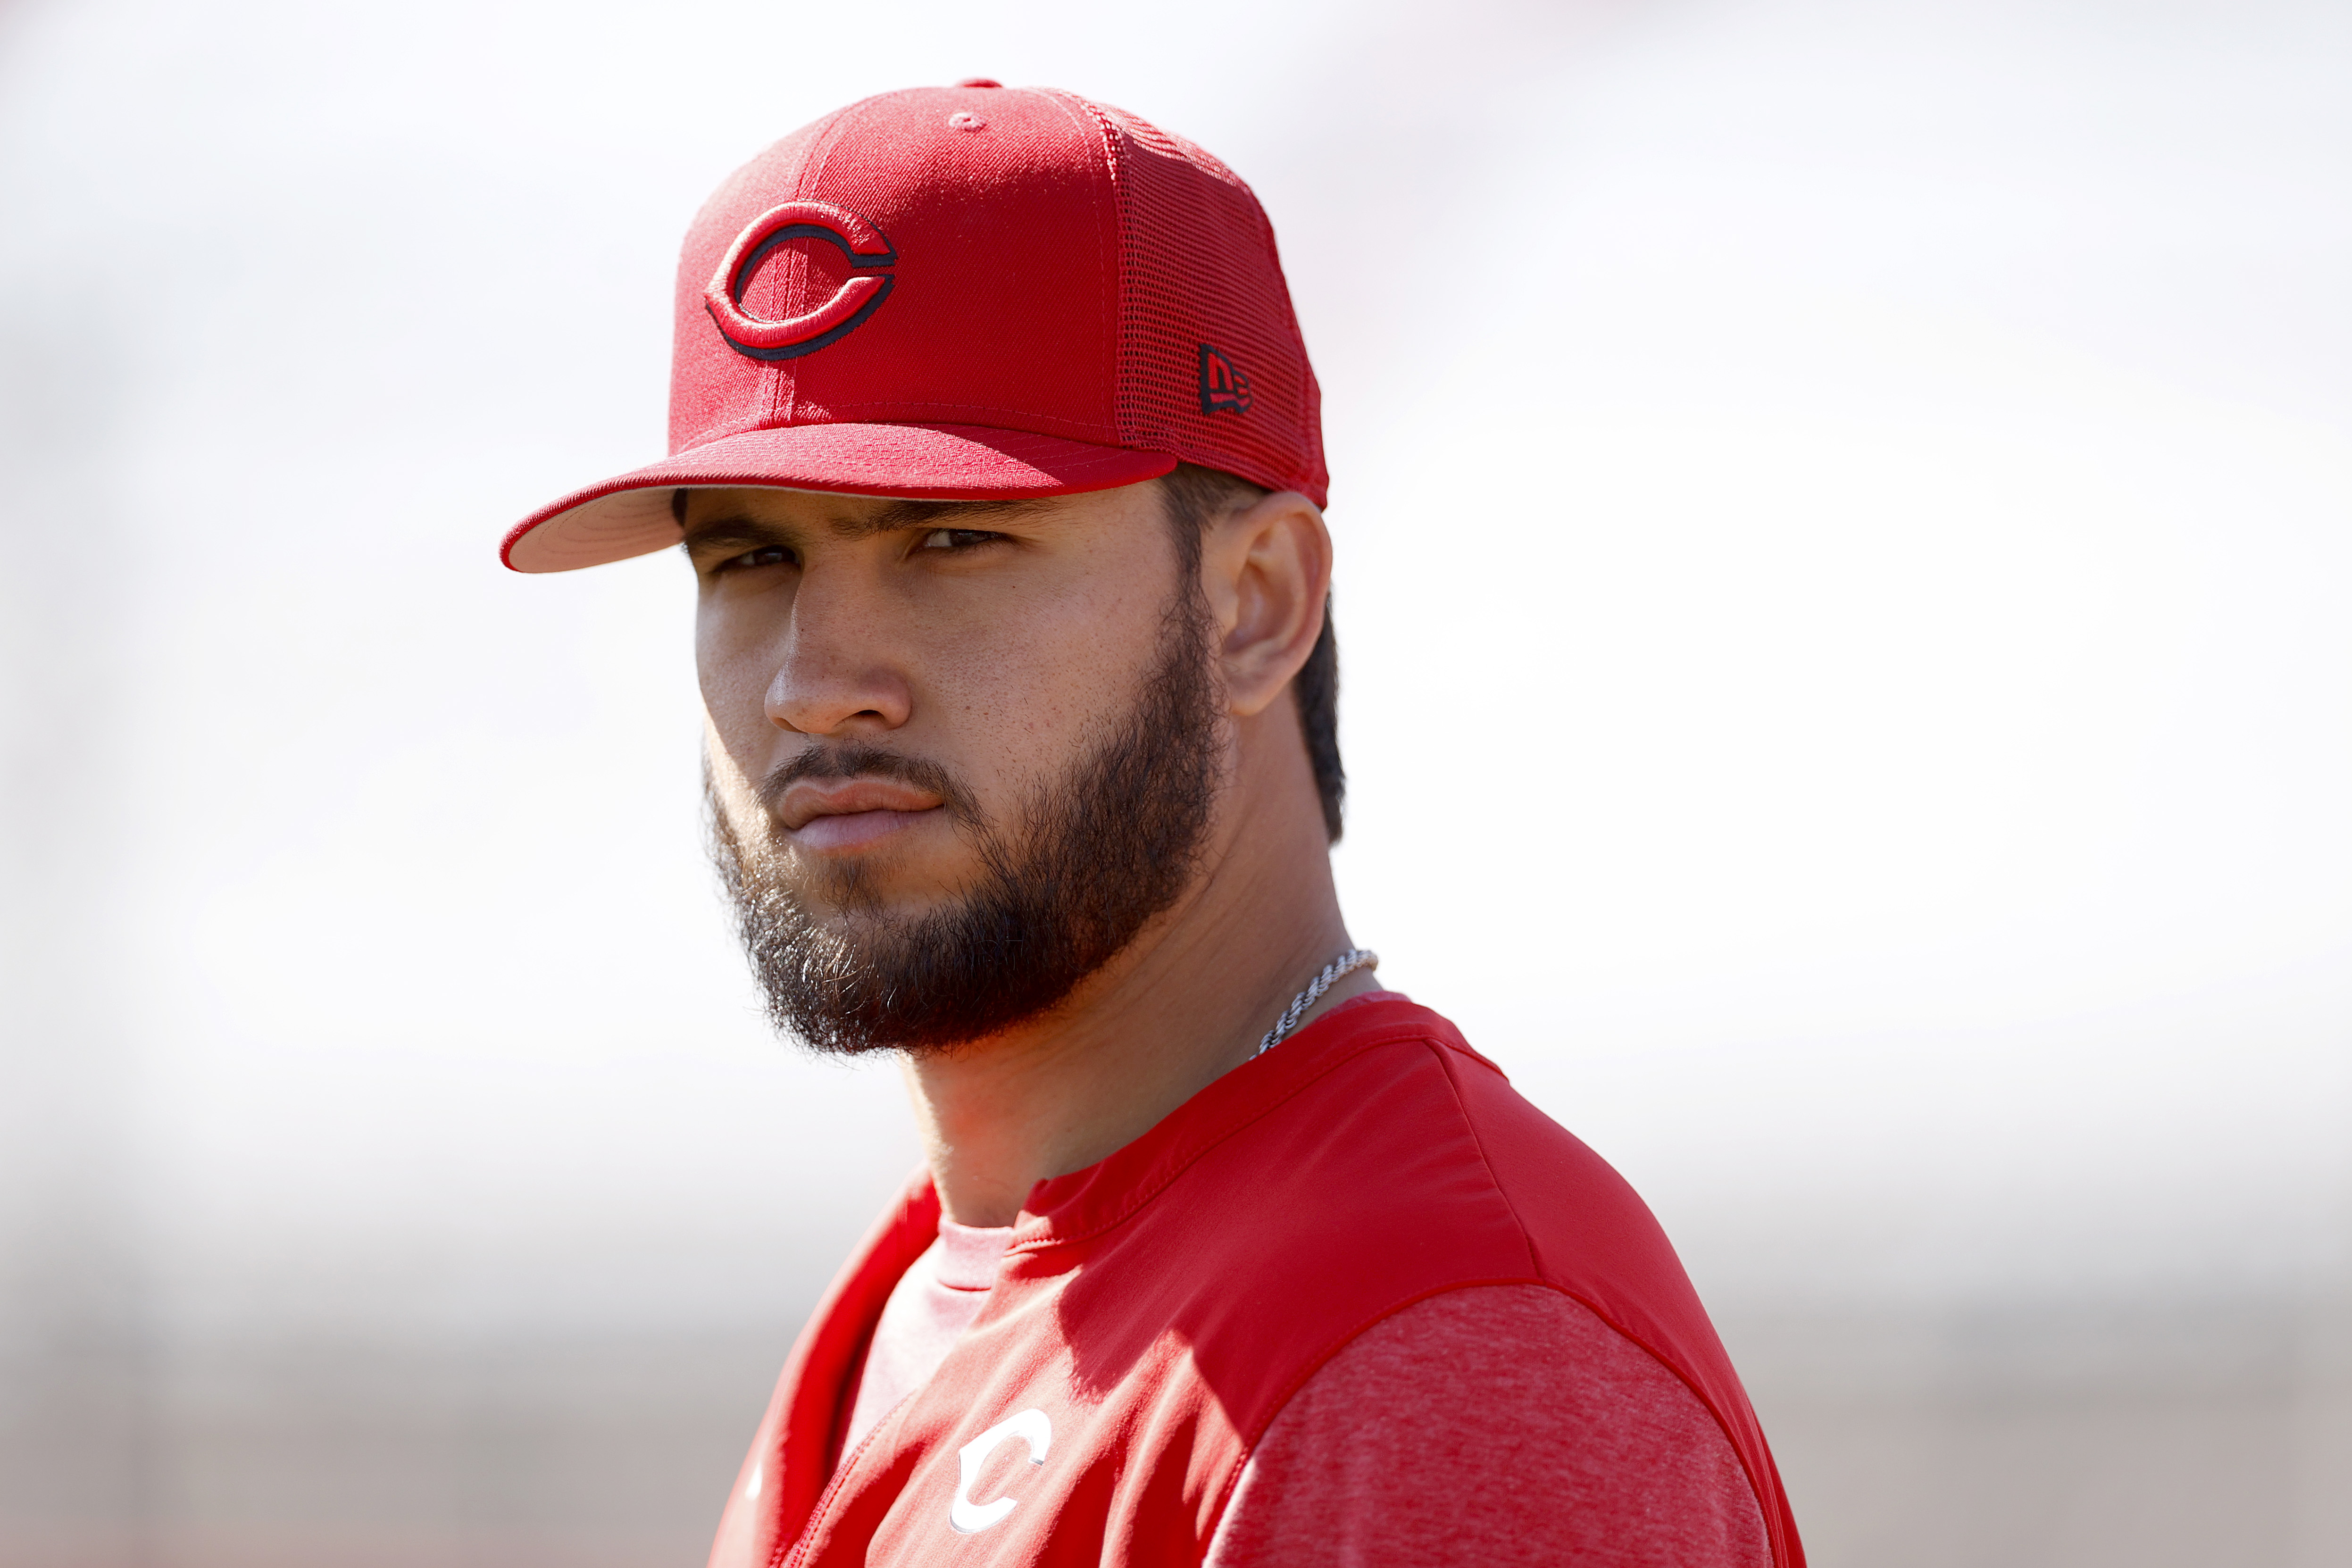 Reds rookie pitcher first in last 50 years to allow homers on